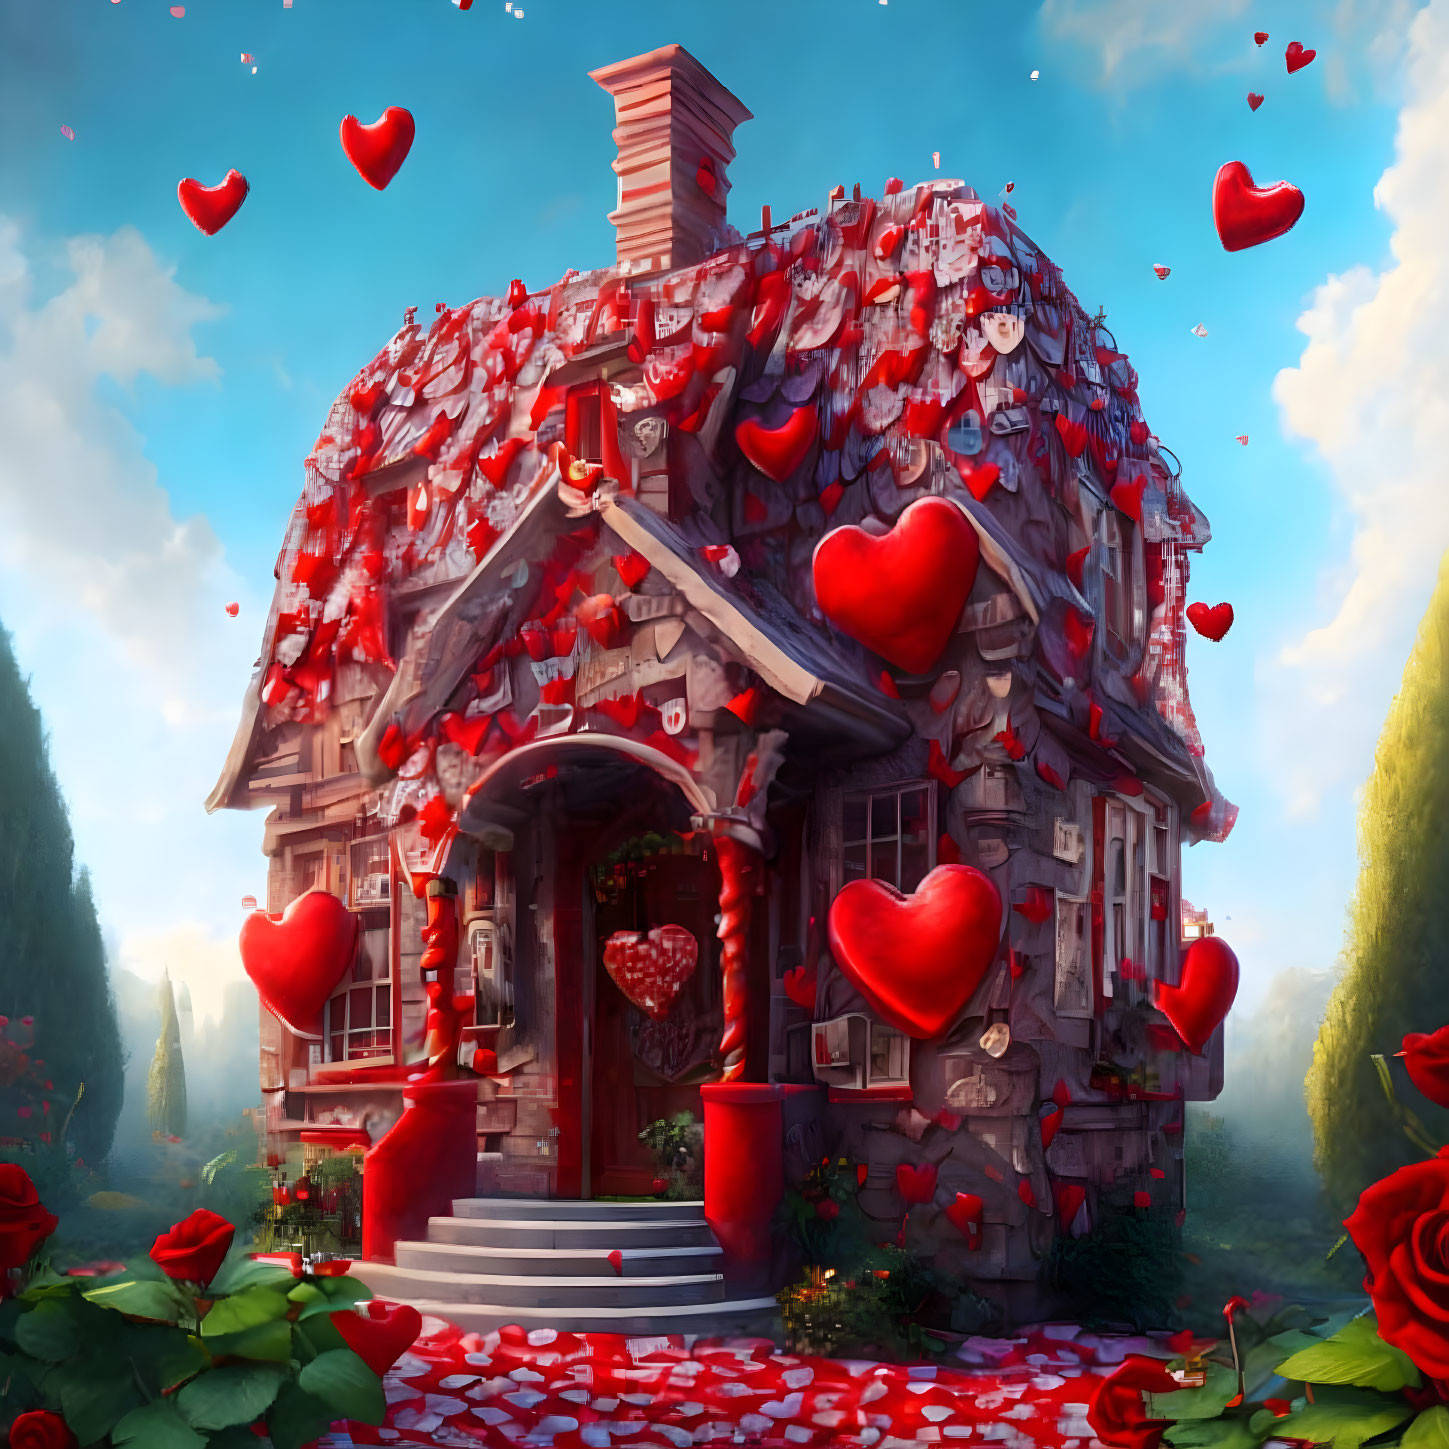 Whimsical cottage with red hearts and roses on Valentine's Day